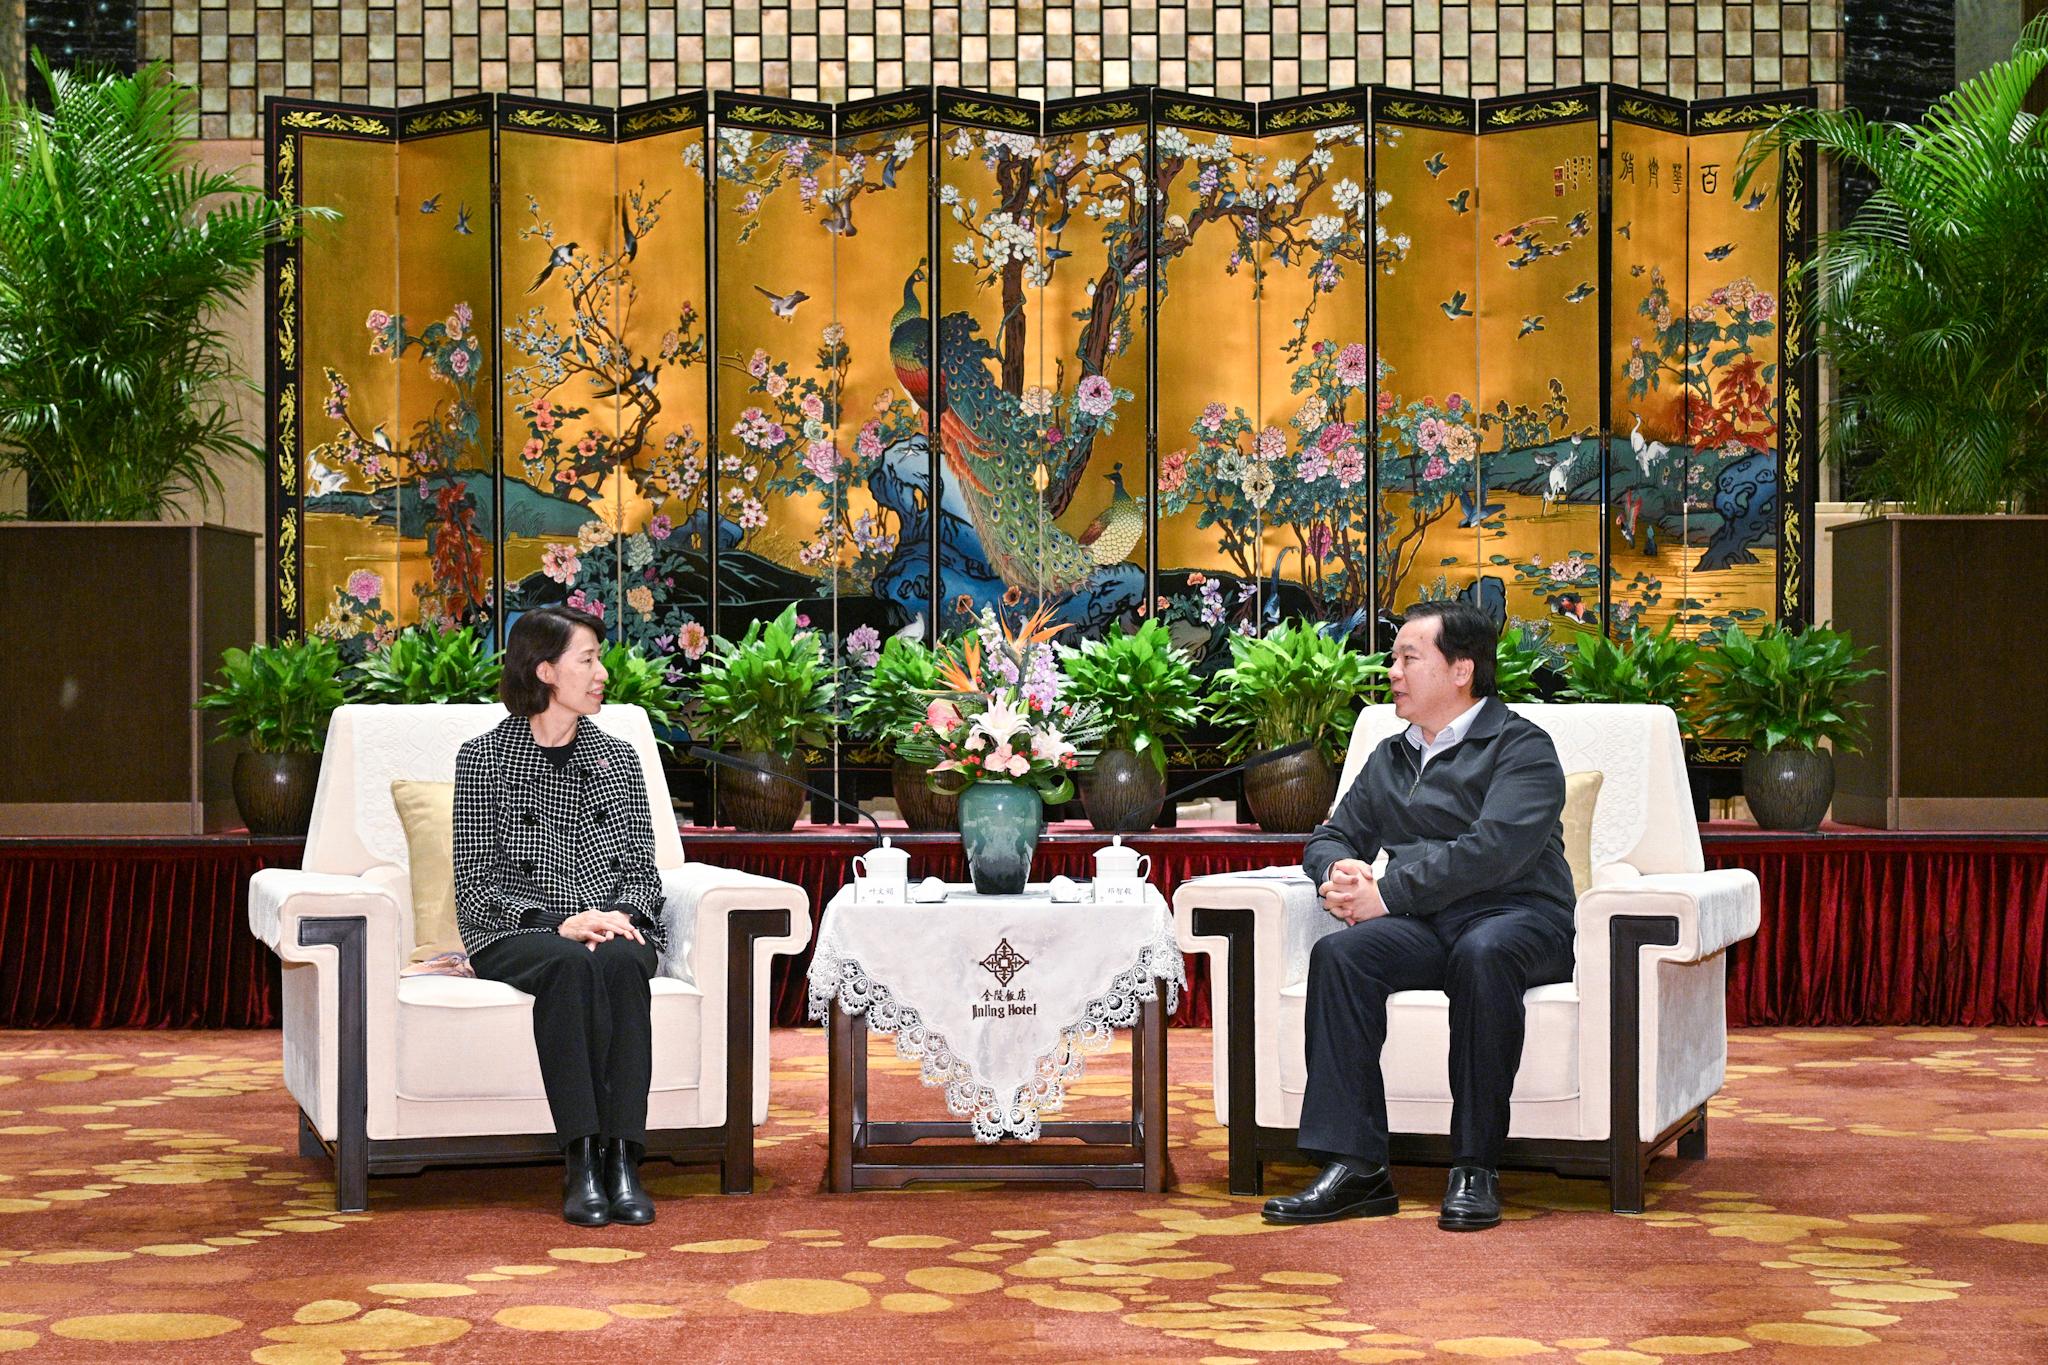 The delegation of politically appointed officials on a national studies programme and duty visit led by the Director of the Chief Executive's Office, Ms Carol Yip (left), met Member of the Standing Committee of the CPC Nanjing Municipal Committee and Vice Mayor of Nanjing Mr Deng Zhiyi (right) today (November 24).